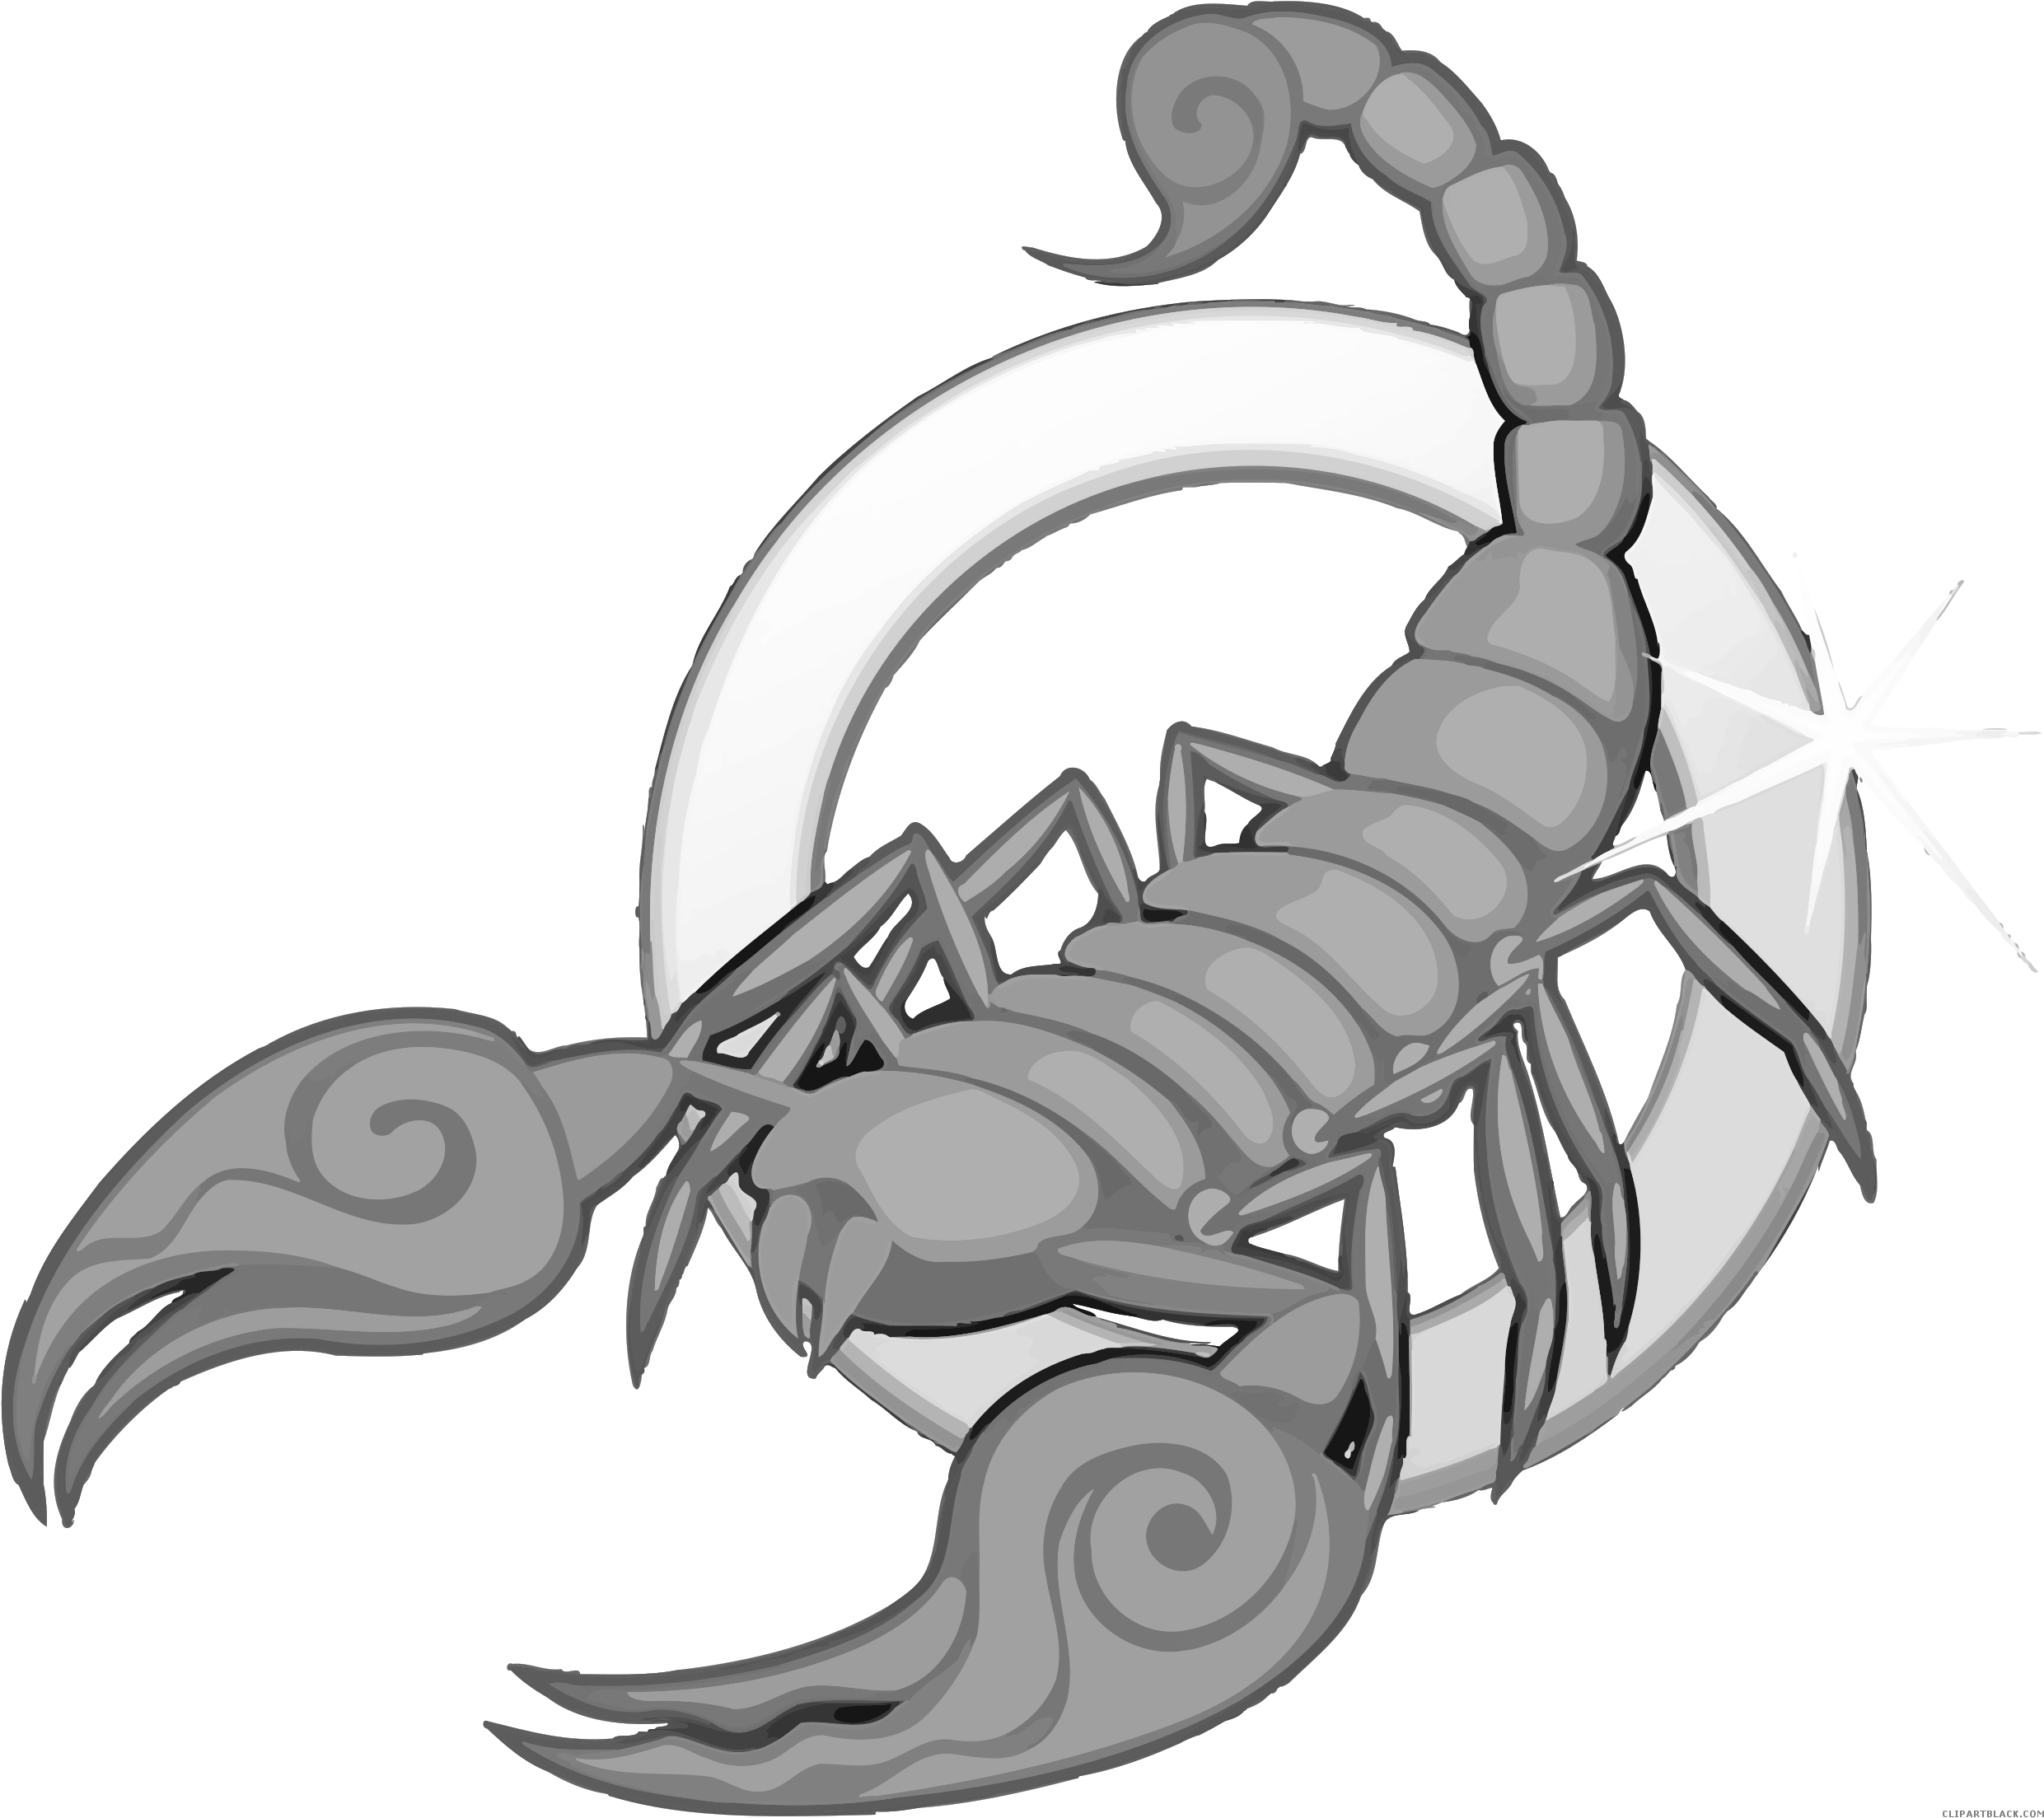 Scorpion Animal Free Black White Clipart Images Clipartblack - Zodiac  Astrological Sign Scorpio Scorpion 10/23 - (2500x2224) Png Clipart Download